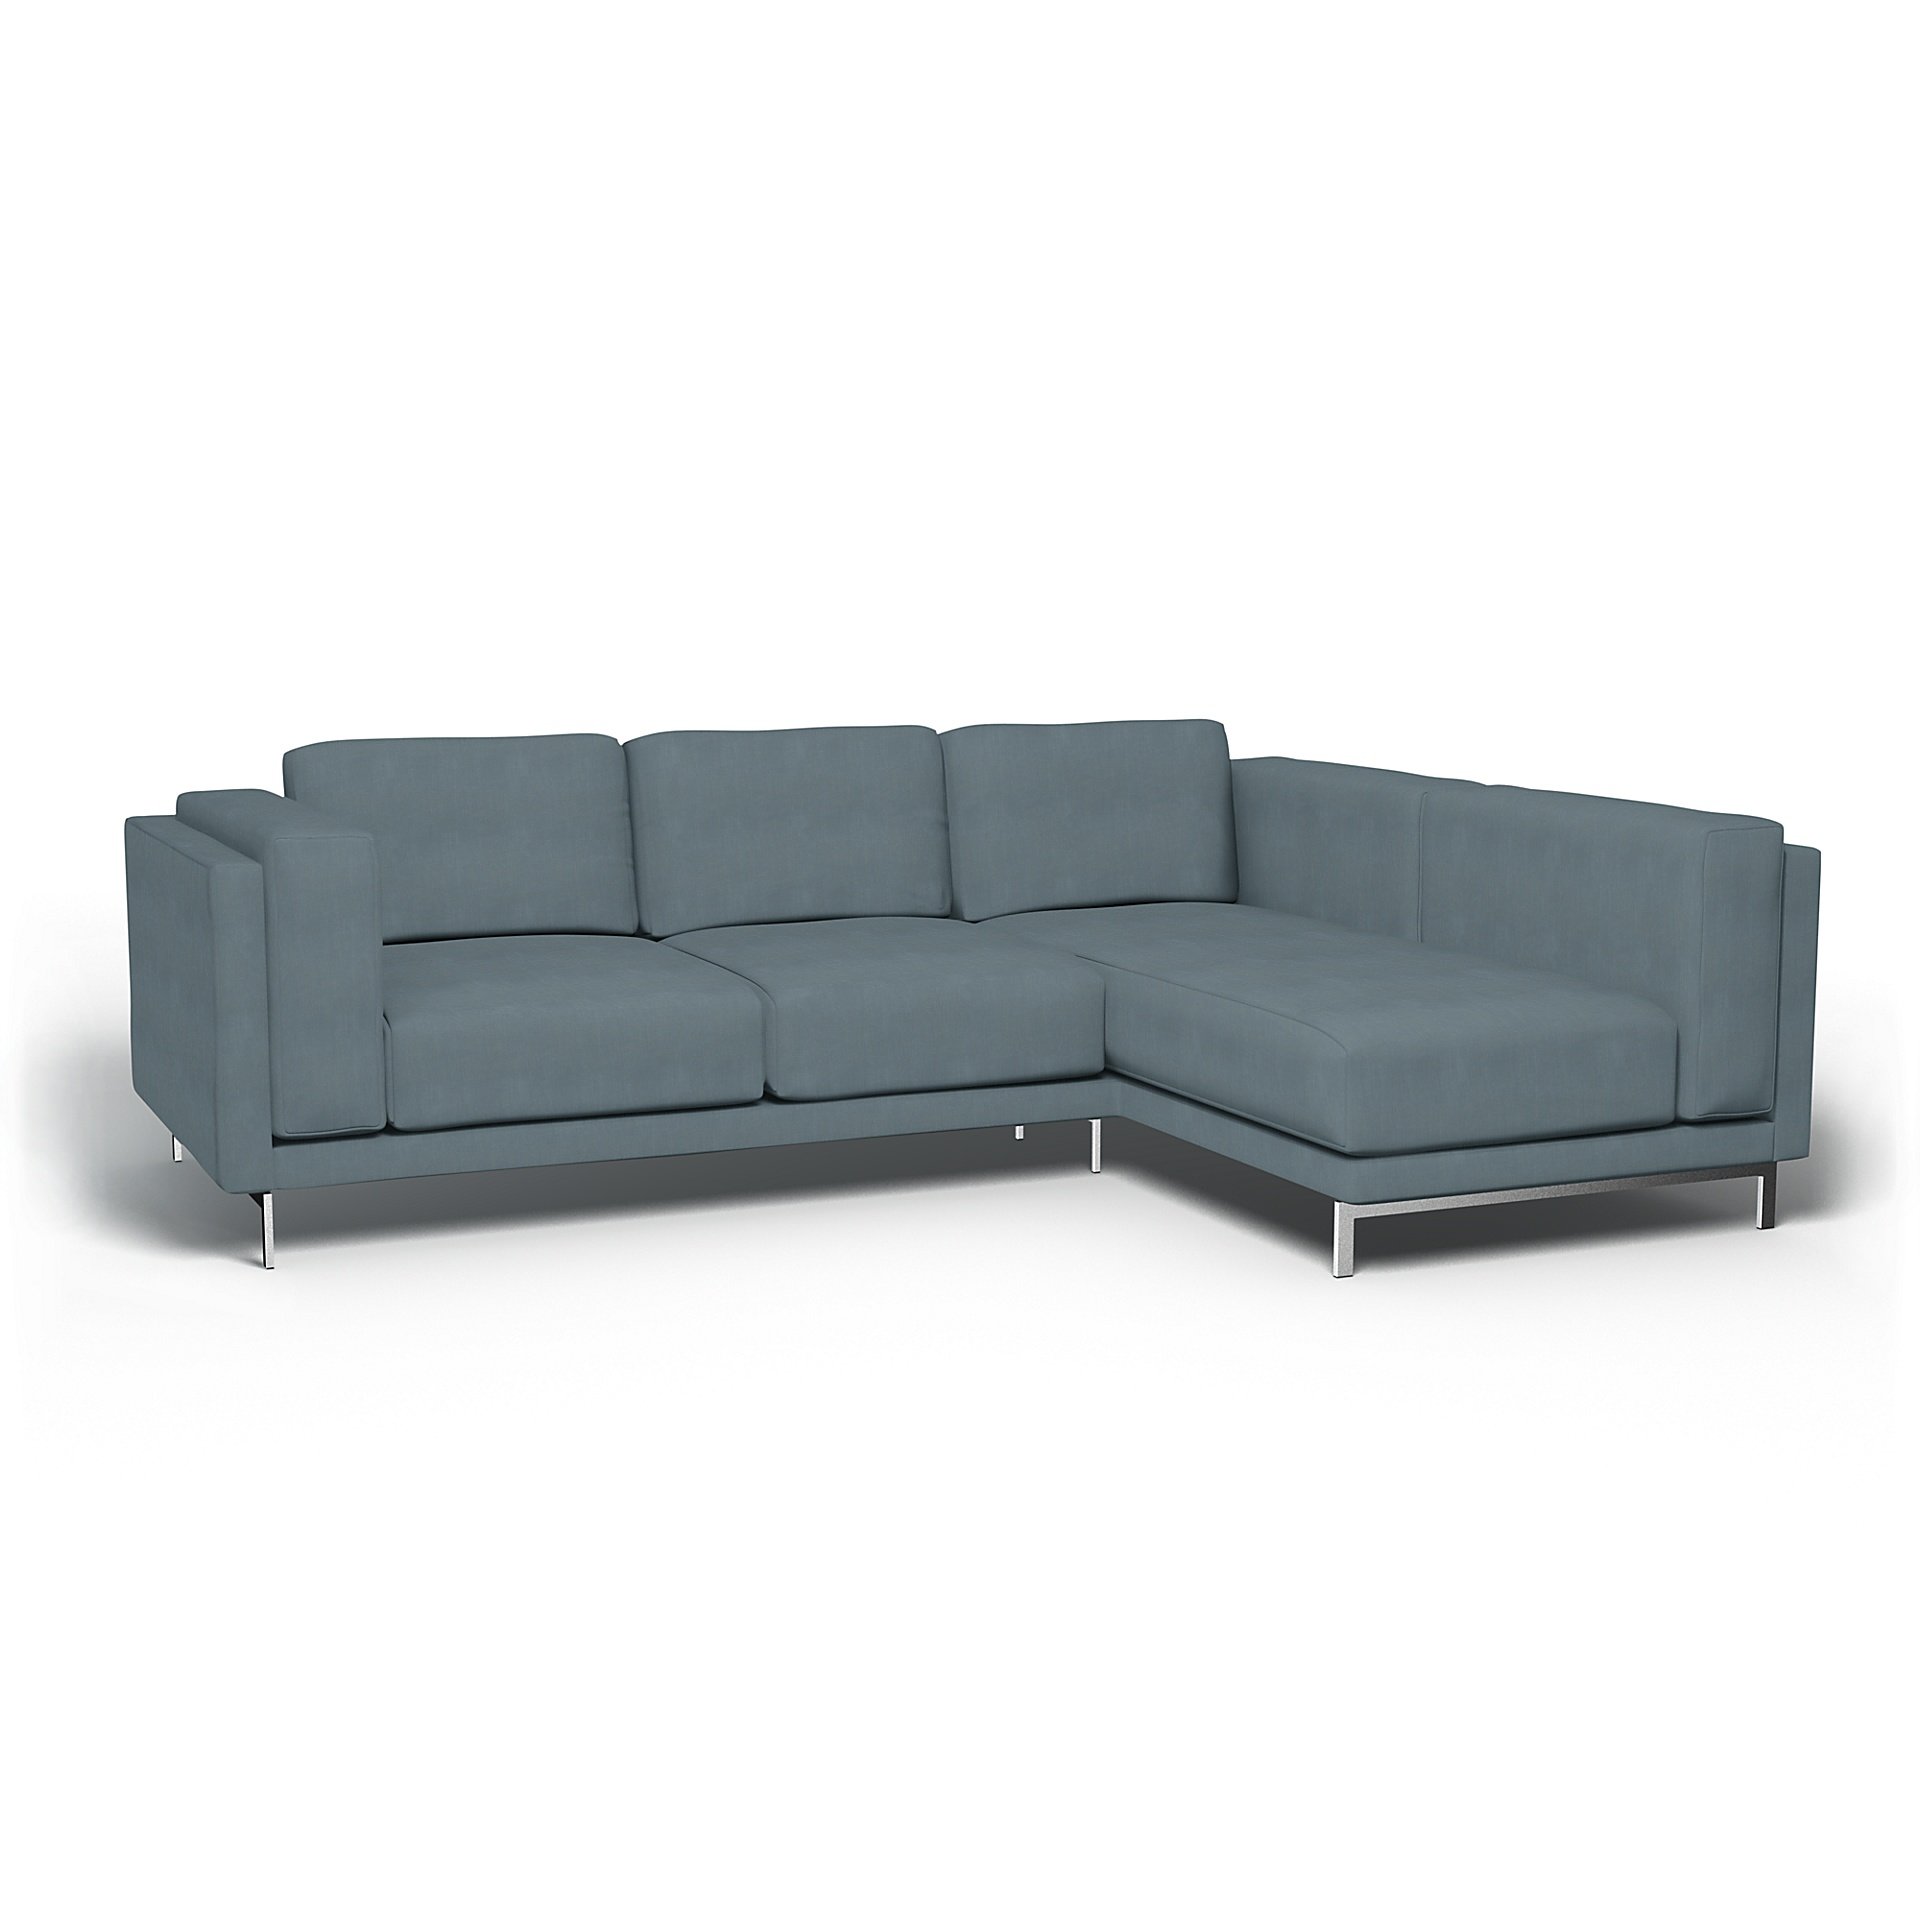 IKEA - Nockeby 3 Seat Sofa with Right Chaise Cover, Dusk, Linen - Bemz